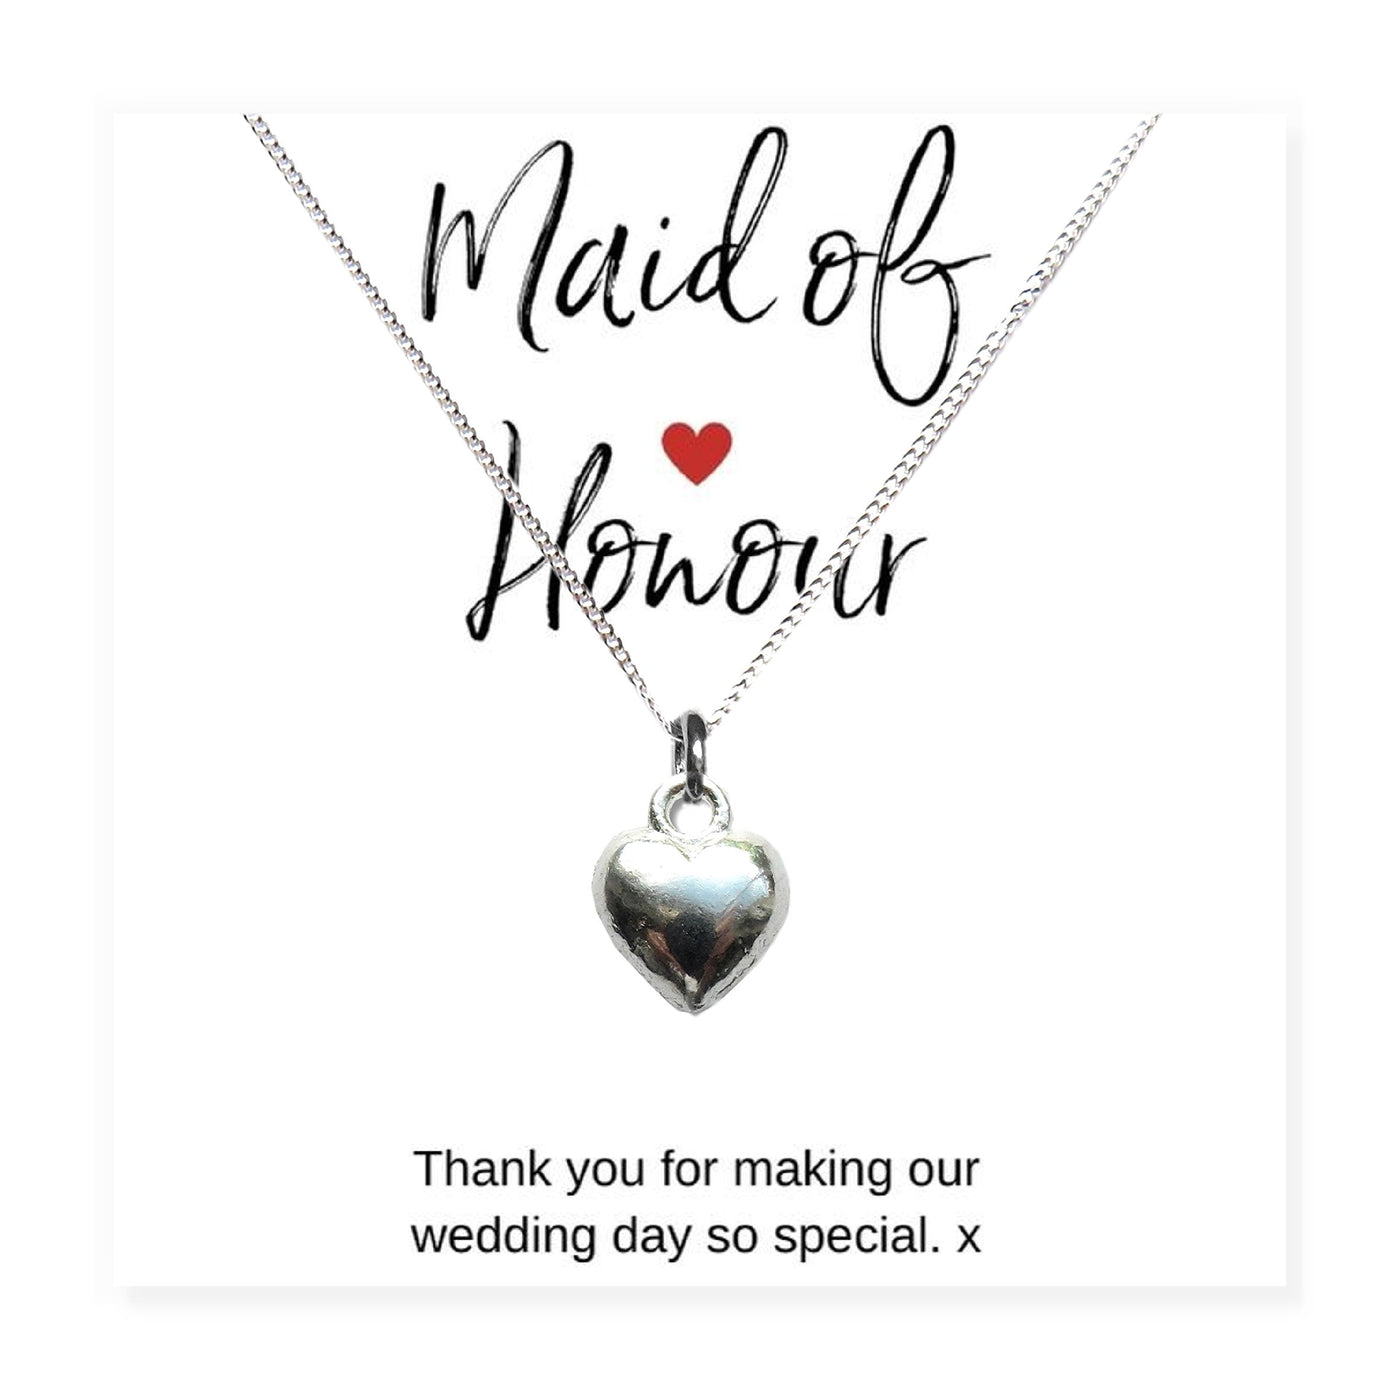 Maid of Honour Heart Necklace & Thank You Card